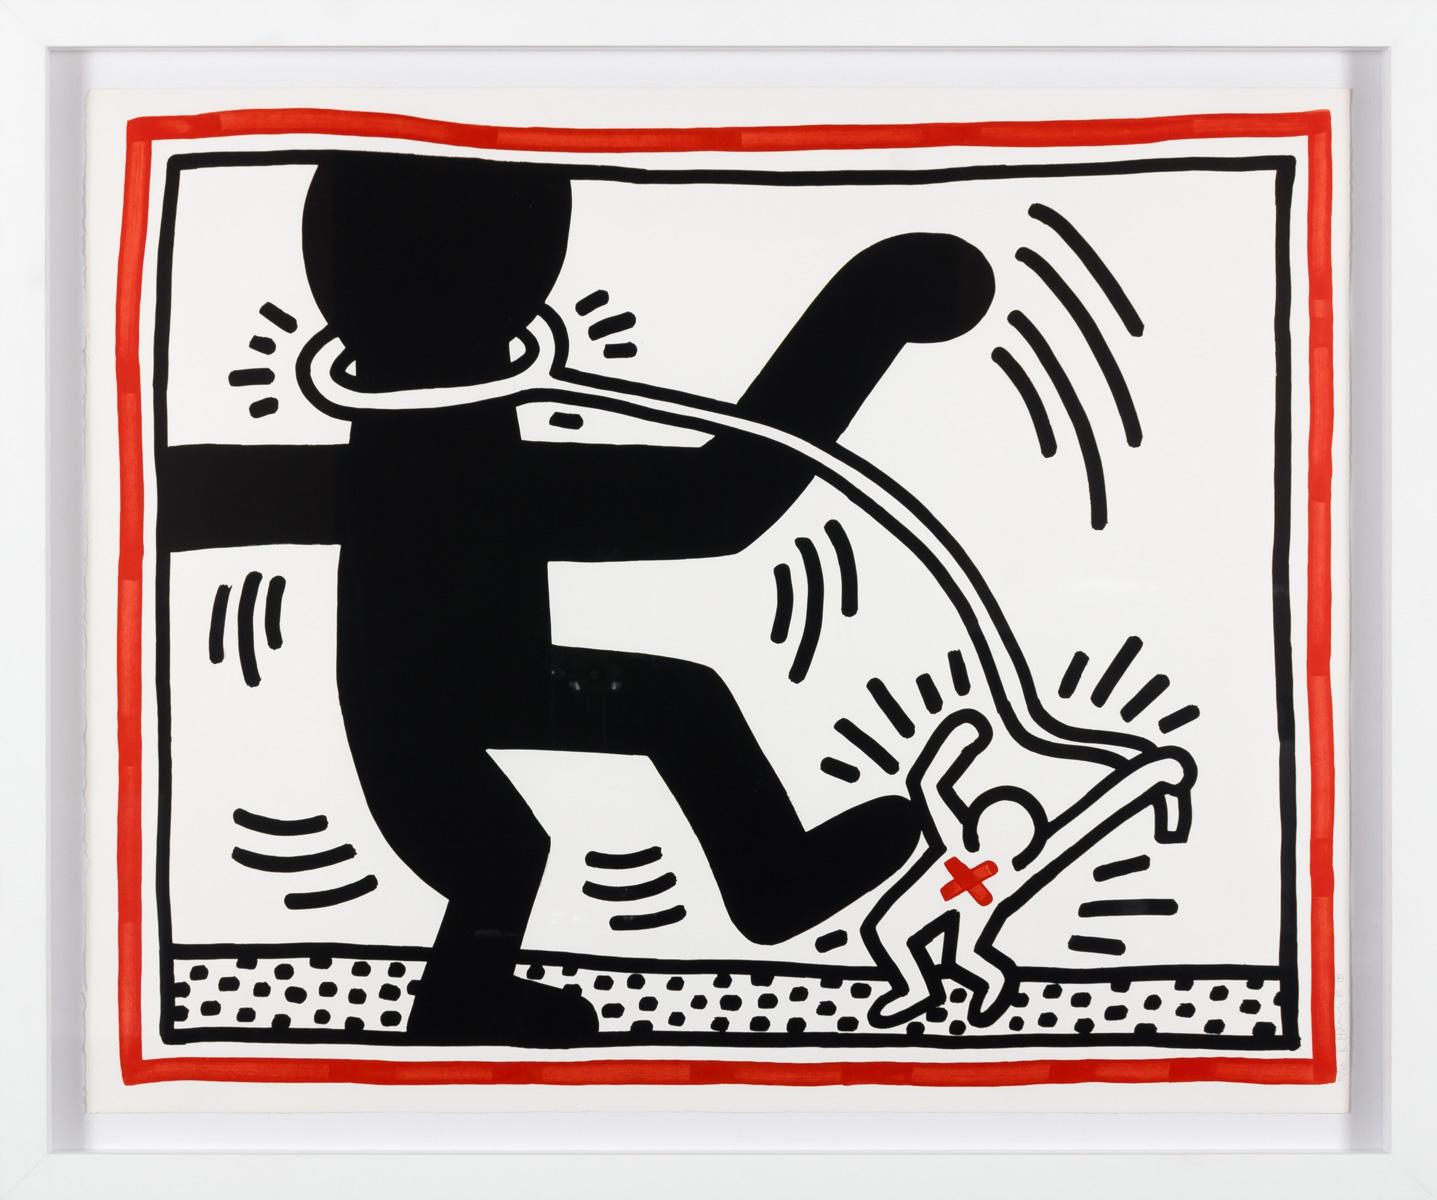 Free South Africa, 1985 (#2) - Print by Keith Haring